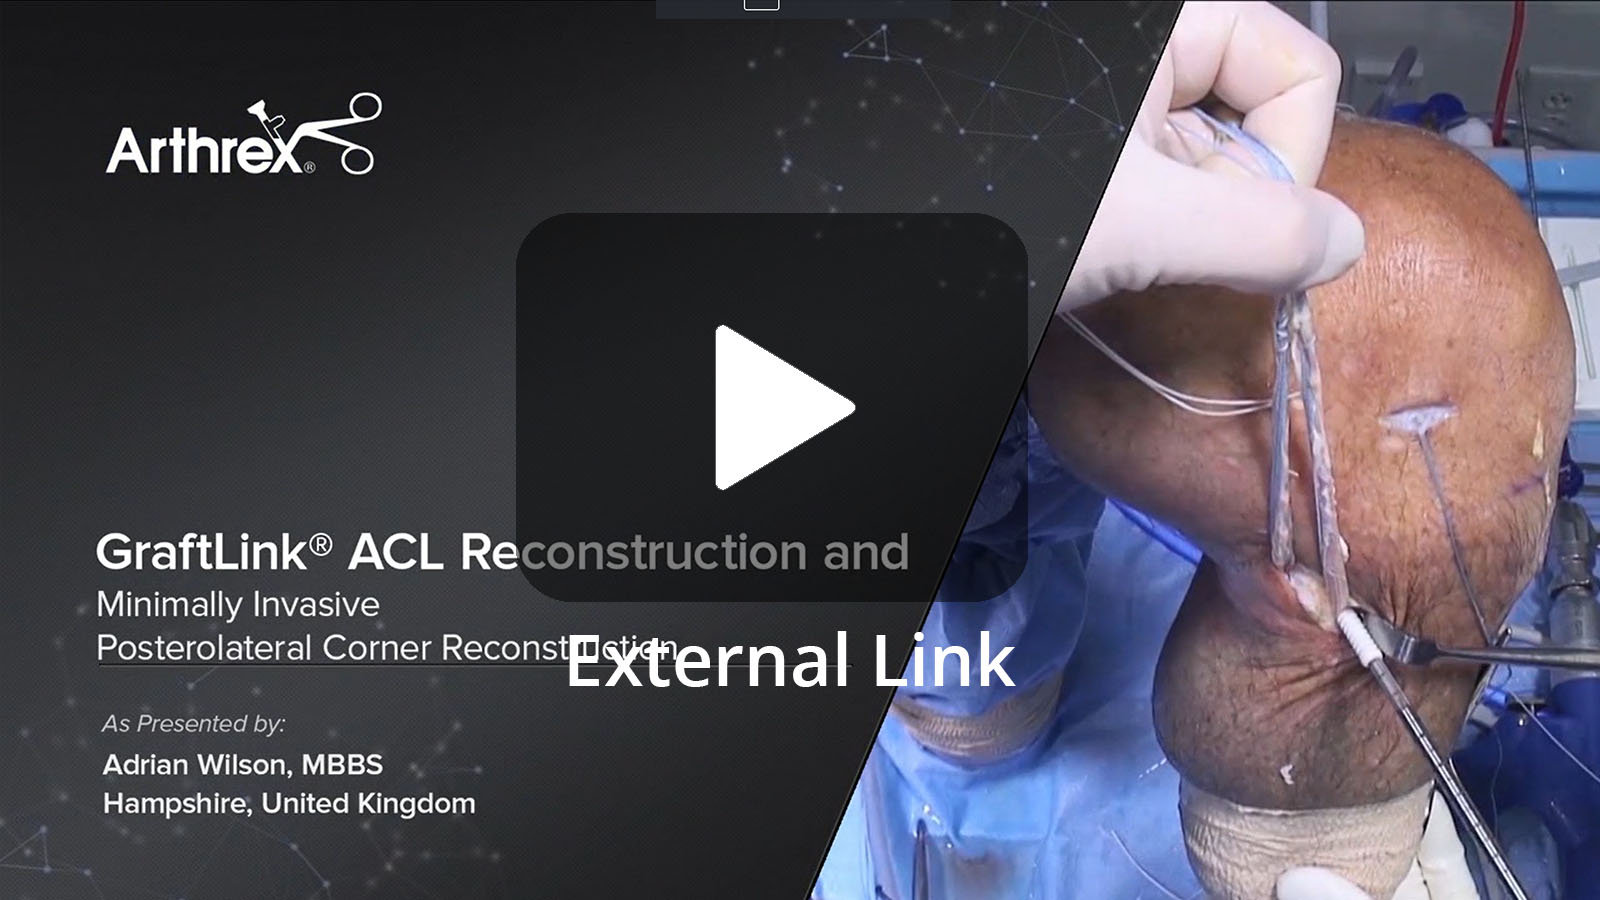 GraftLink® Tendon ACL Reconstruction and Minimally Invasive Posterolateral Corner Reconstruction (External Link)